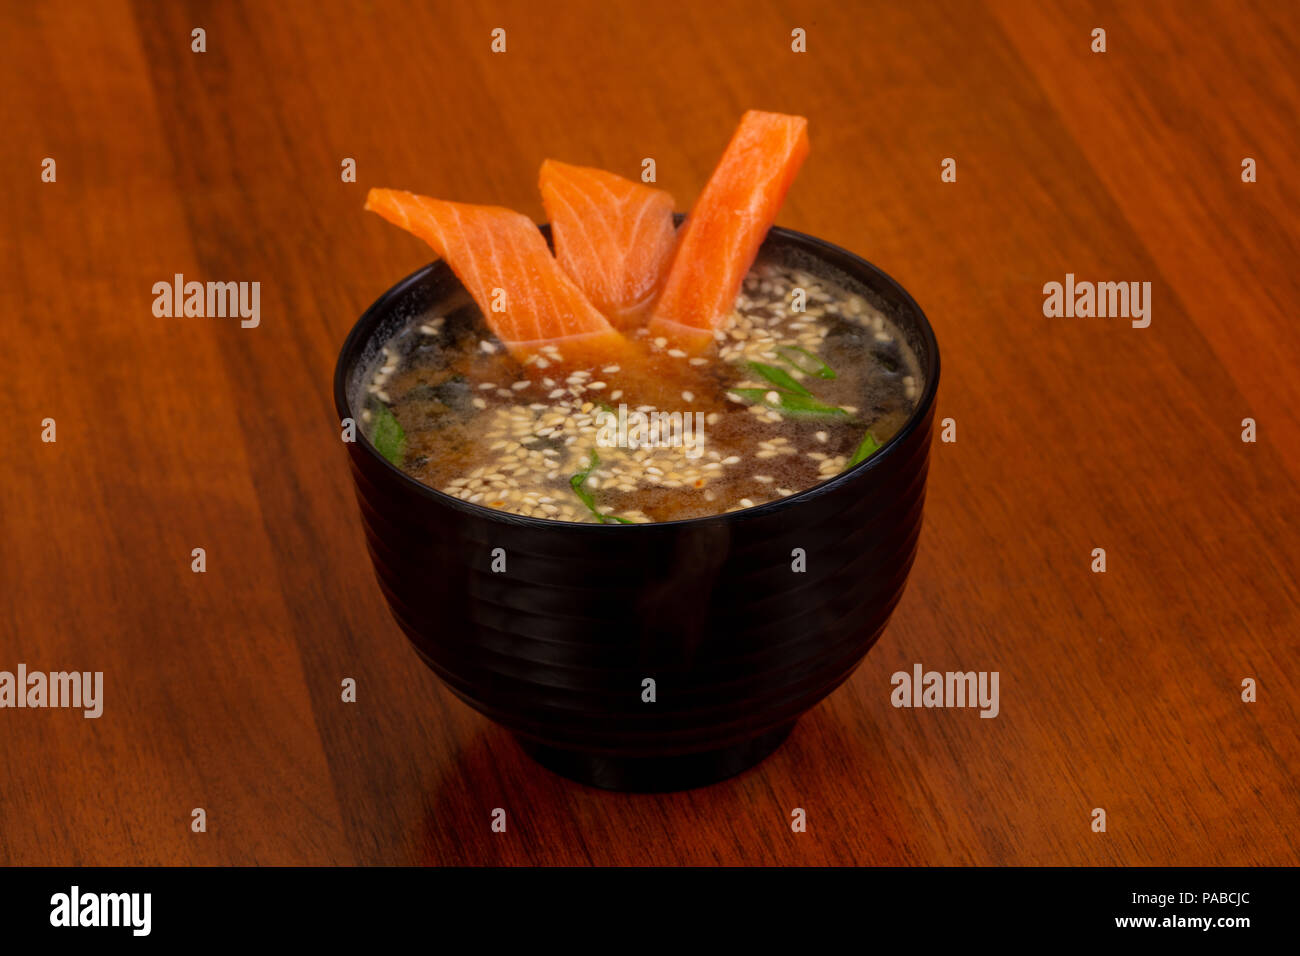 Japanese Miso soup with Salmon and sesam seeds Stock Photo